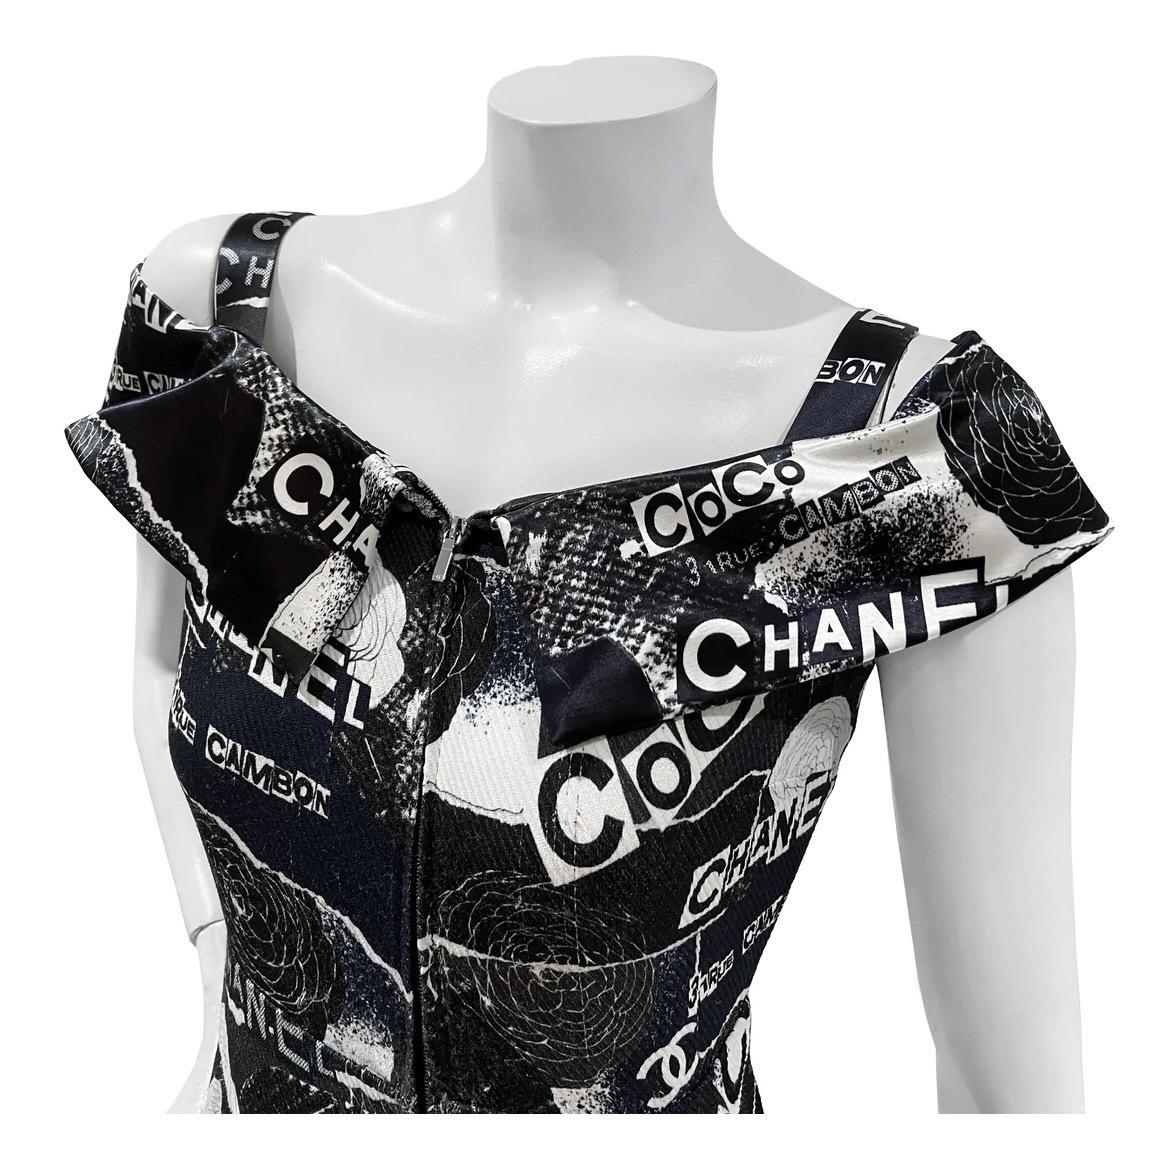 Sleeveless Logo Print Jumpsuit by Chanel
Spring / Summer 2020 Ready-To-Wear
Made in France
Navy and white 'Coco Chanel' and floral print detail
Invisible front zipper closure
Dual front pockets
Subtle pleat detail near pockets
Satin 'off shoulder'